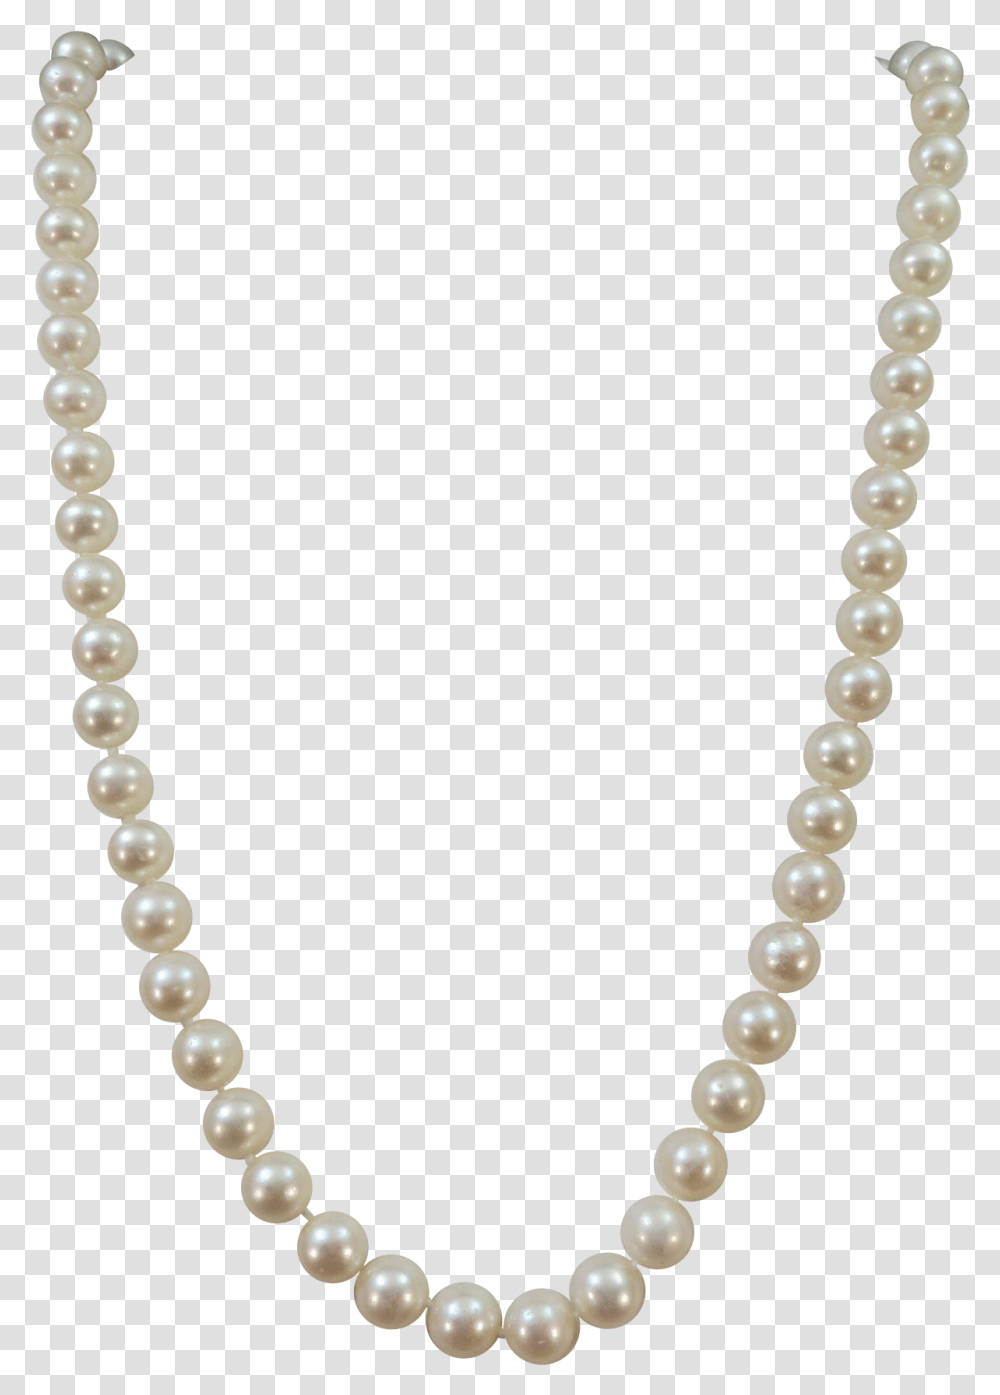 Pearl Images Background Pearl Necklace, Accessories, Accessory, Jewelry, Bead Necklace Transparent Png